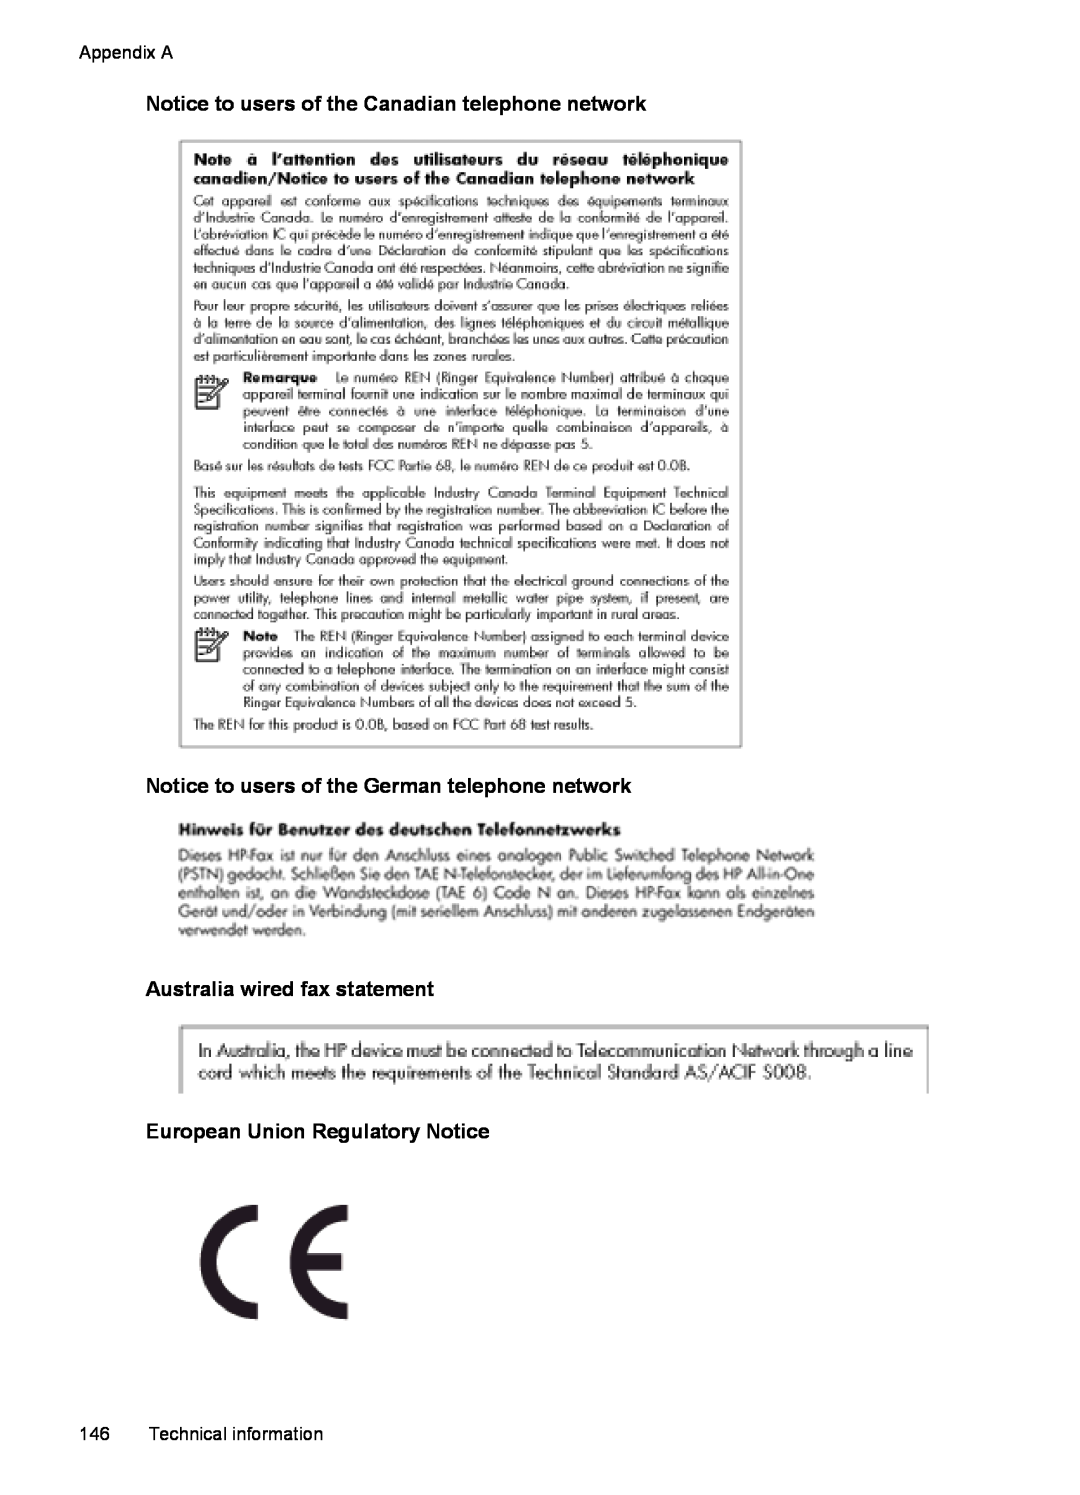 HP 6600 - H7 manual Notice to users of the Canadian telephone network, Notice to users of the German telephone network 